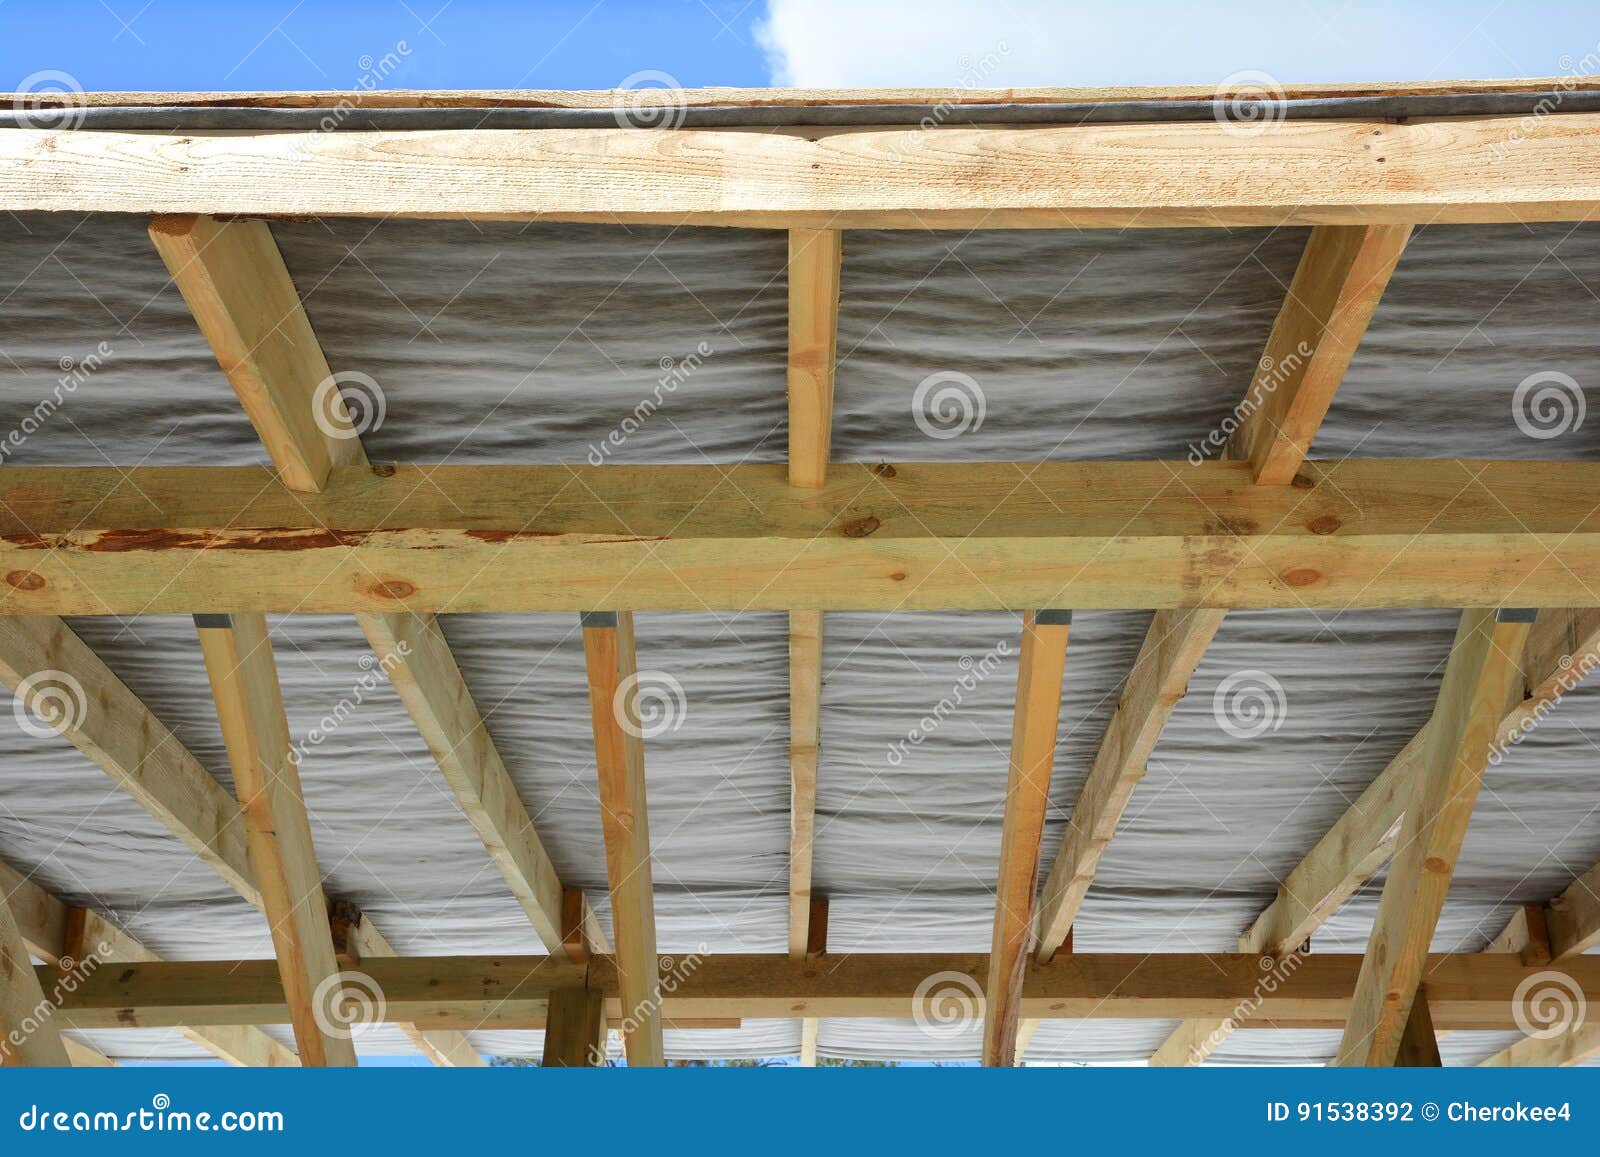 Roof Contractor Repair Wooden Roof Construction House Building